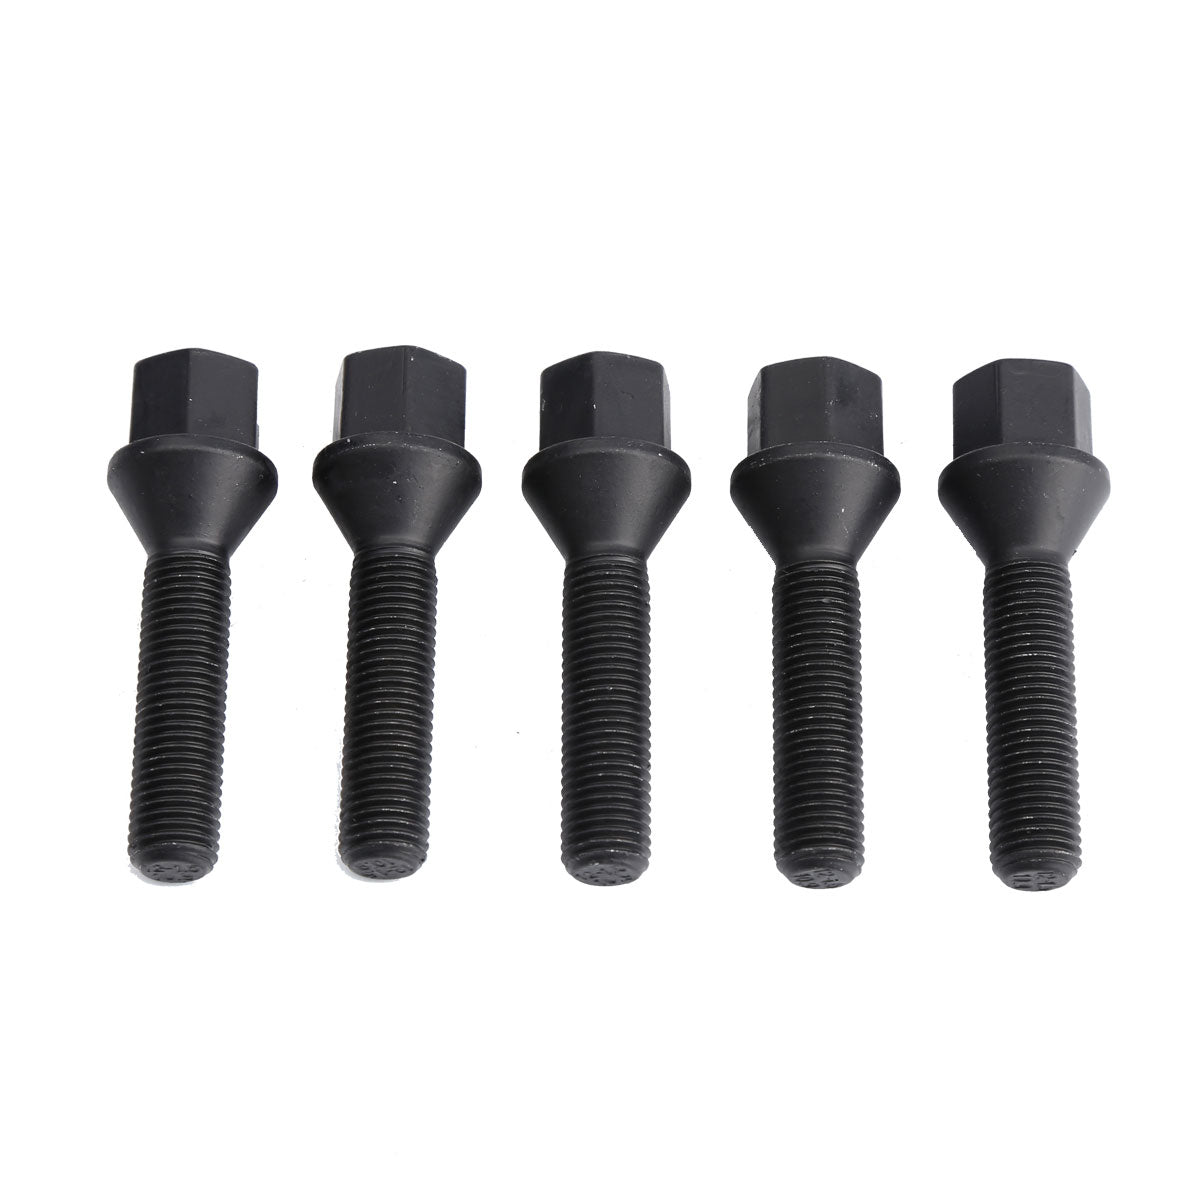 20pcs 40mm Shank Conical Seat M12x1.5 Aftermarket Lug Bolts For BMW Wheel Spacers xccscss.